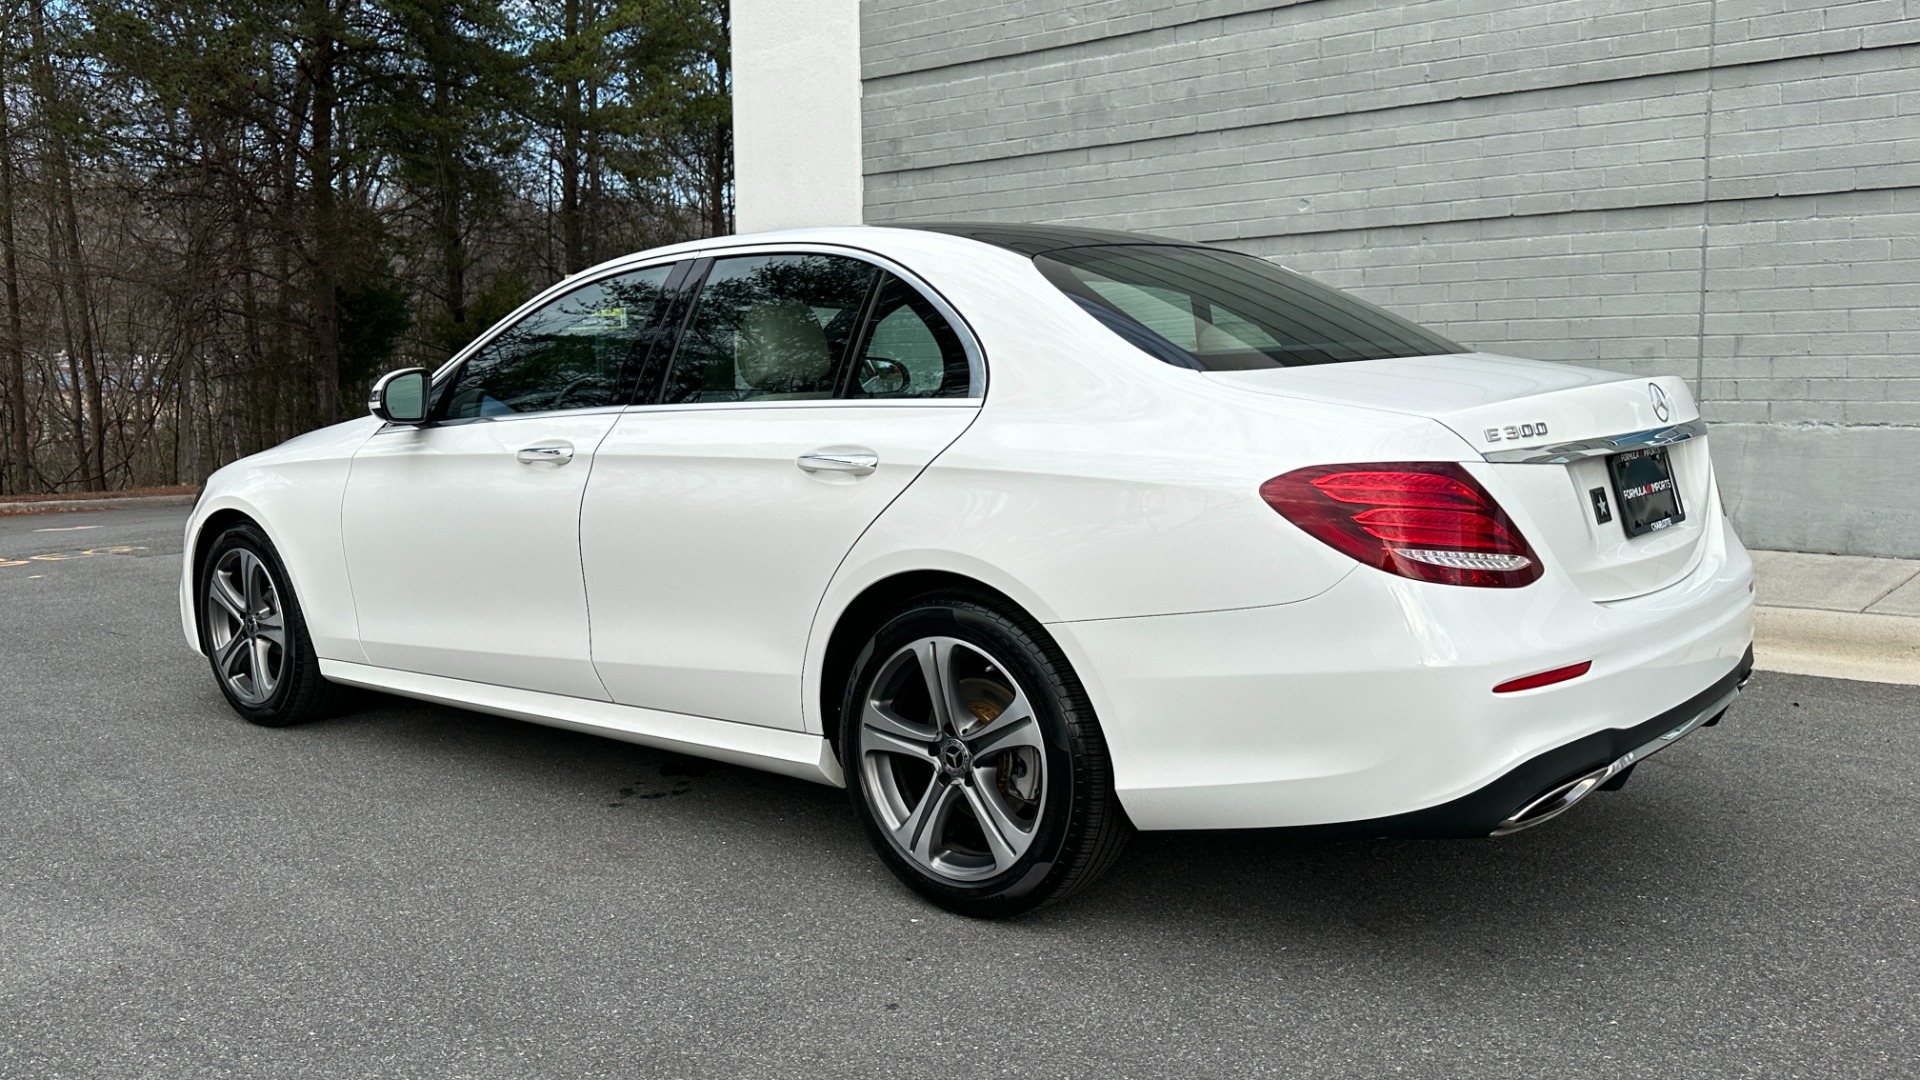 Used 2019 Mercedes-Benz E-Class E300 / PREMIUM PACKAGE / BLIND SPOT / BURMESTER SOUND / HEATED STEERING for sale $41,495 at Formula Imports in Charlotte NC 28227 7